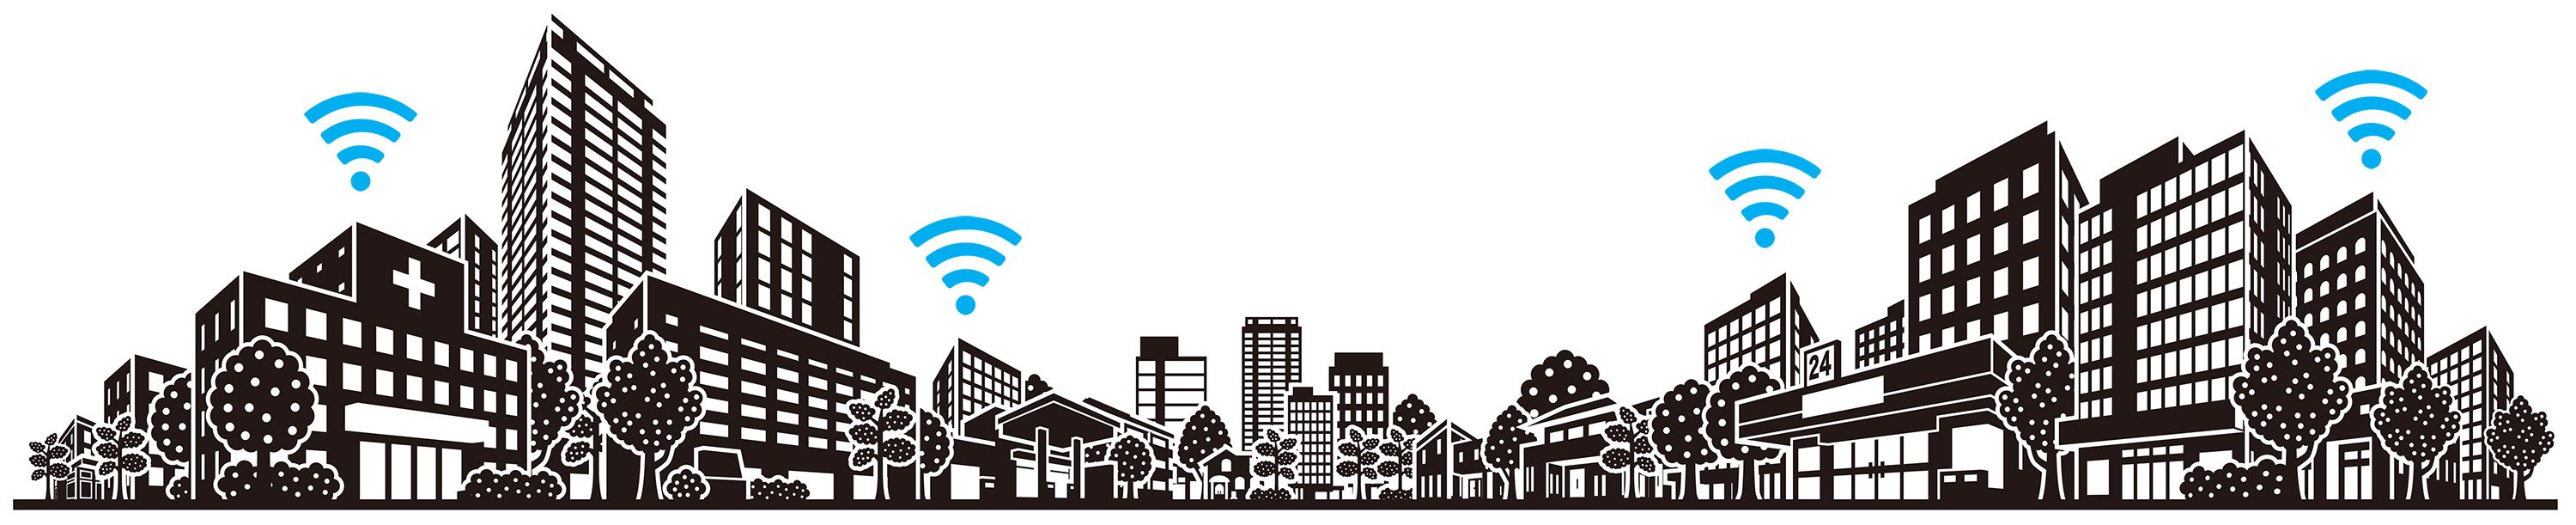 Illustration of a city landscape with buildings and trees and Wi-Fi icons to represent CBRS Private LTE Connectivity